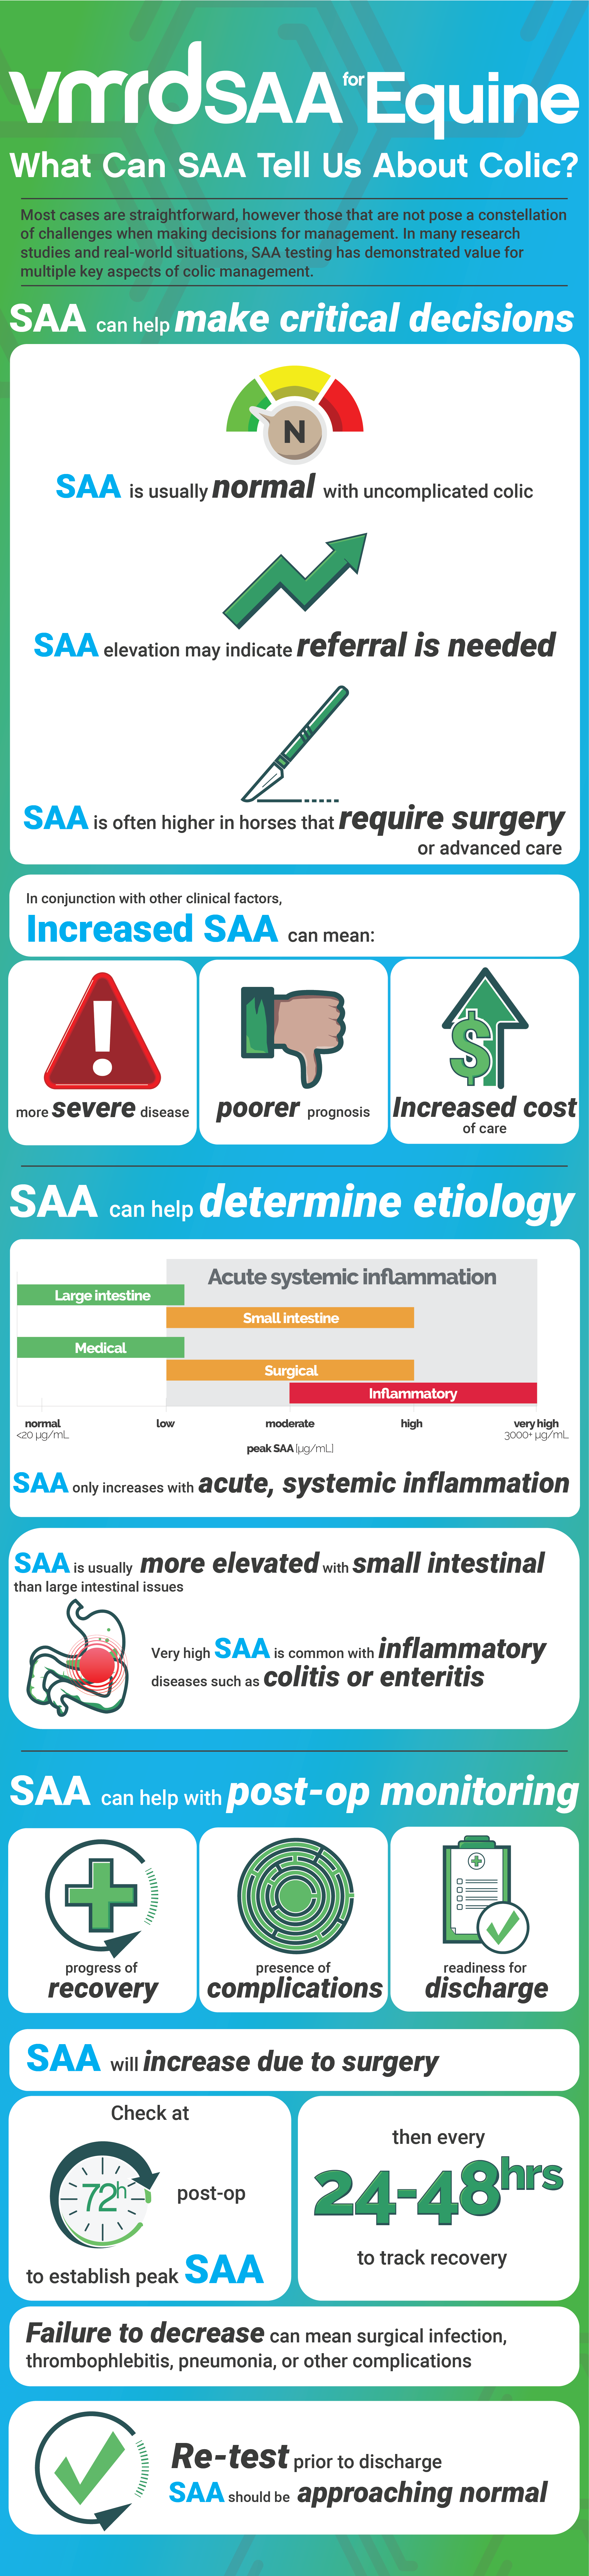 VMRD SAA for Equine - What Can SAA Tell Us About Colic? - INFOGRAPHIC